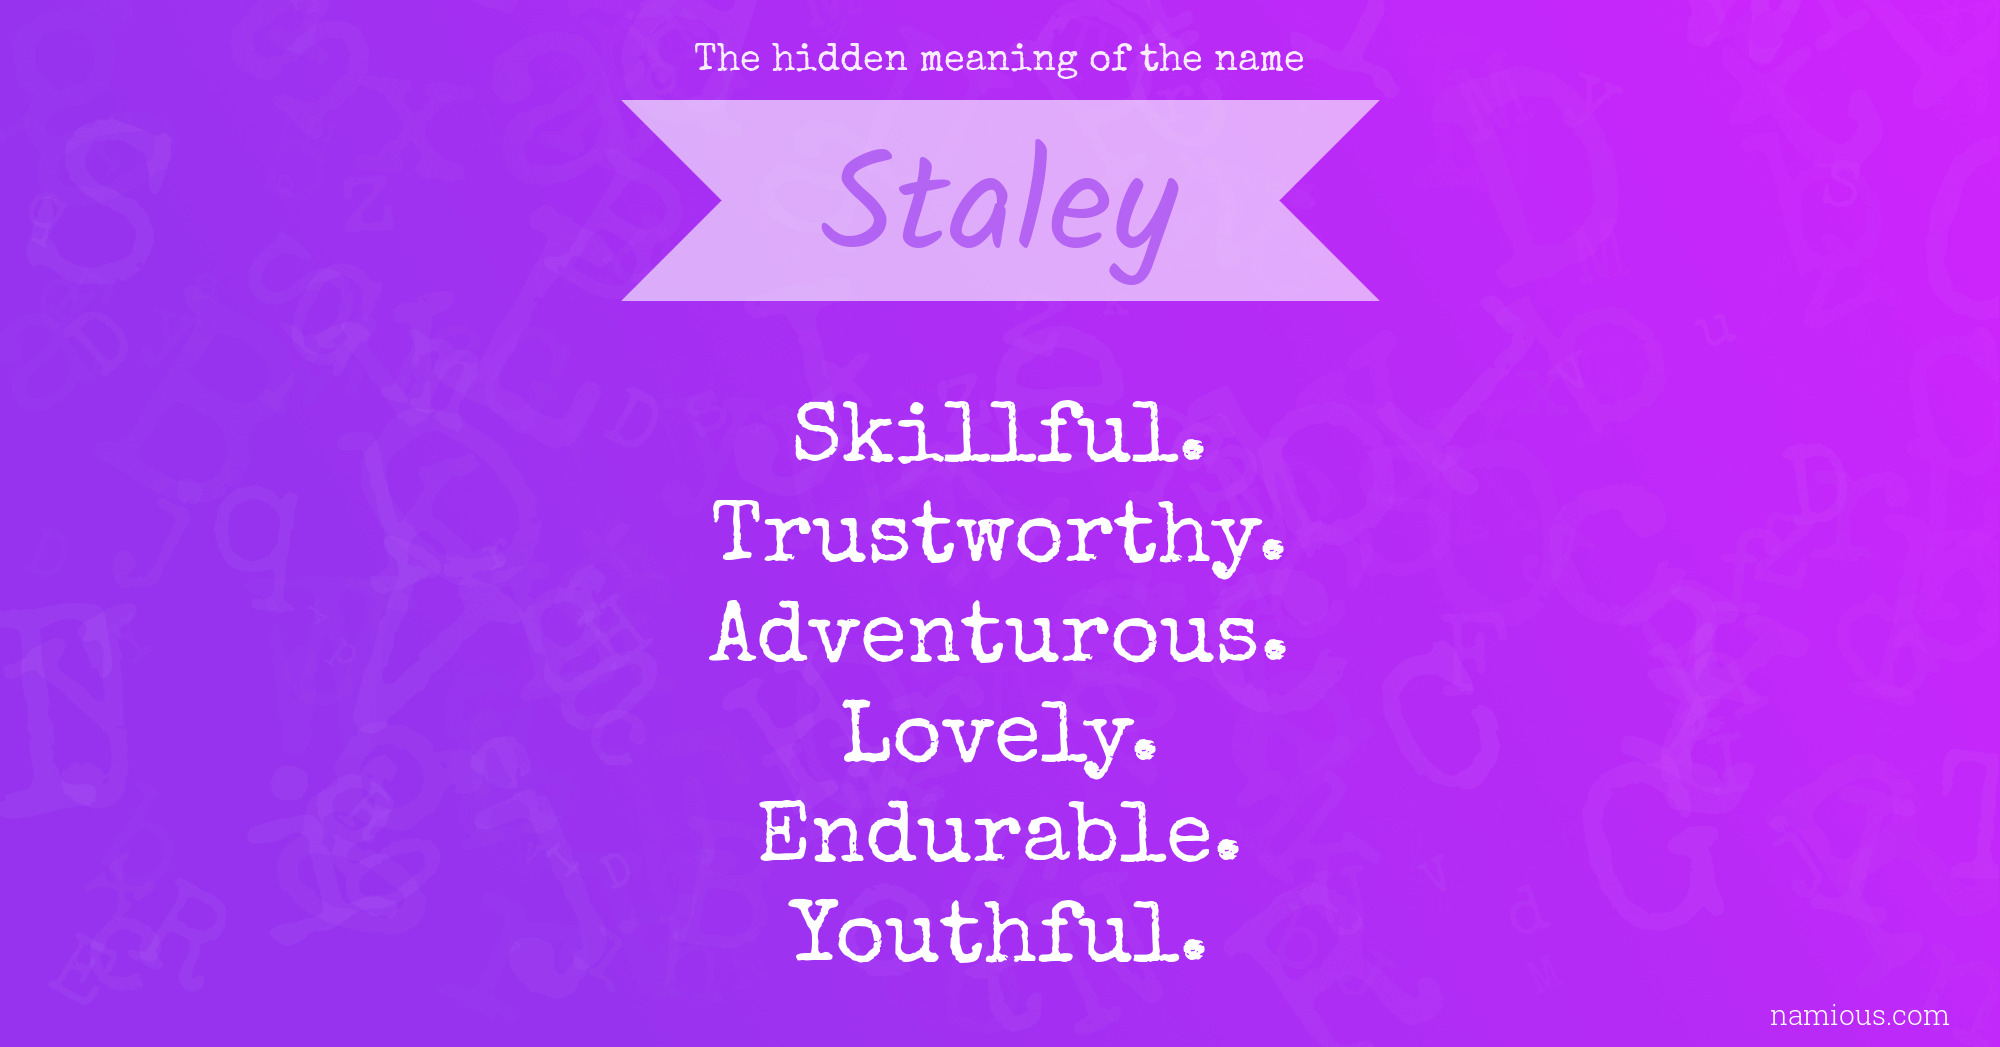 The hidden meaning of the name Staley